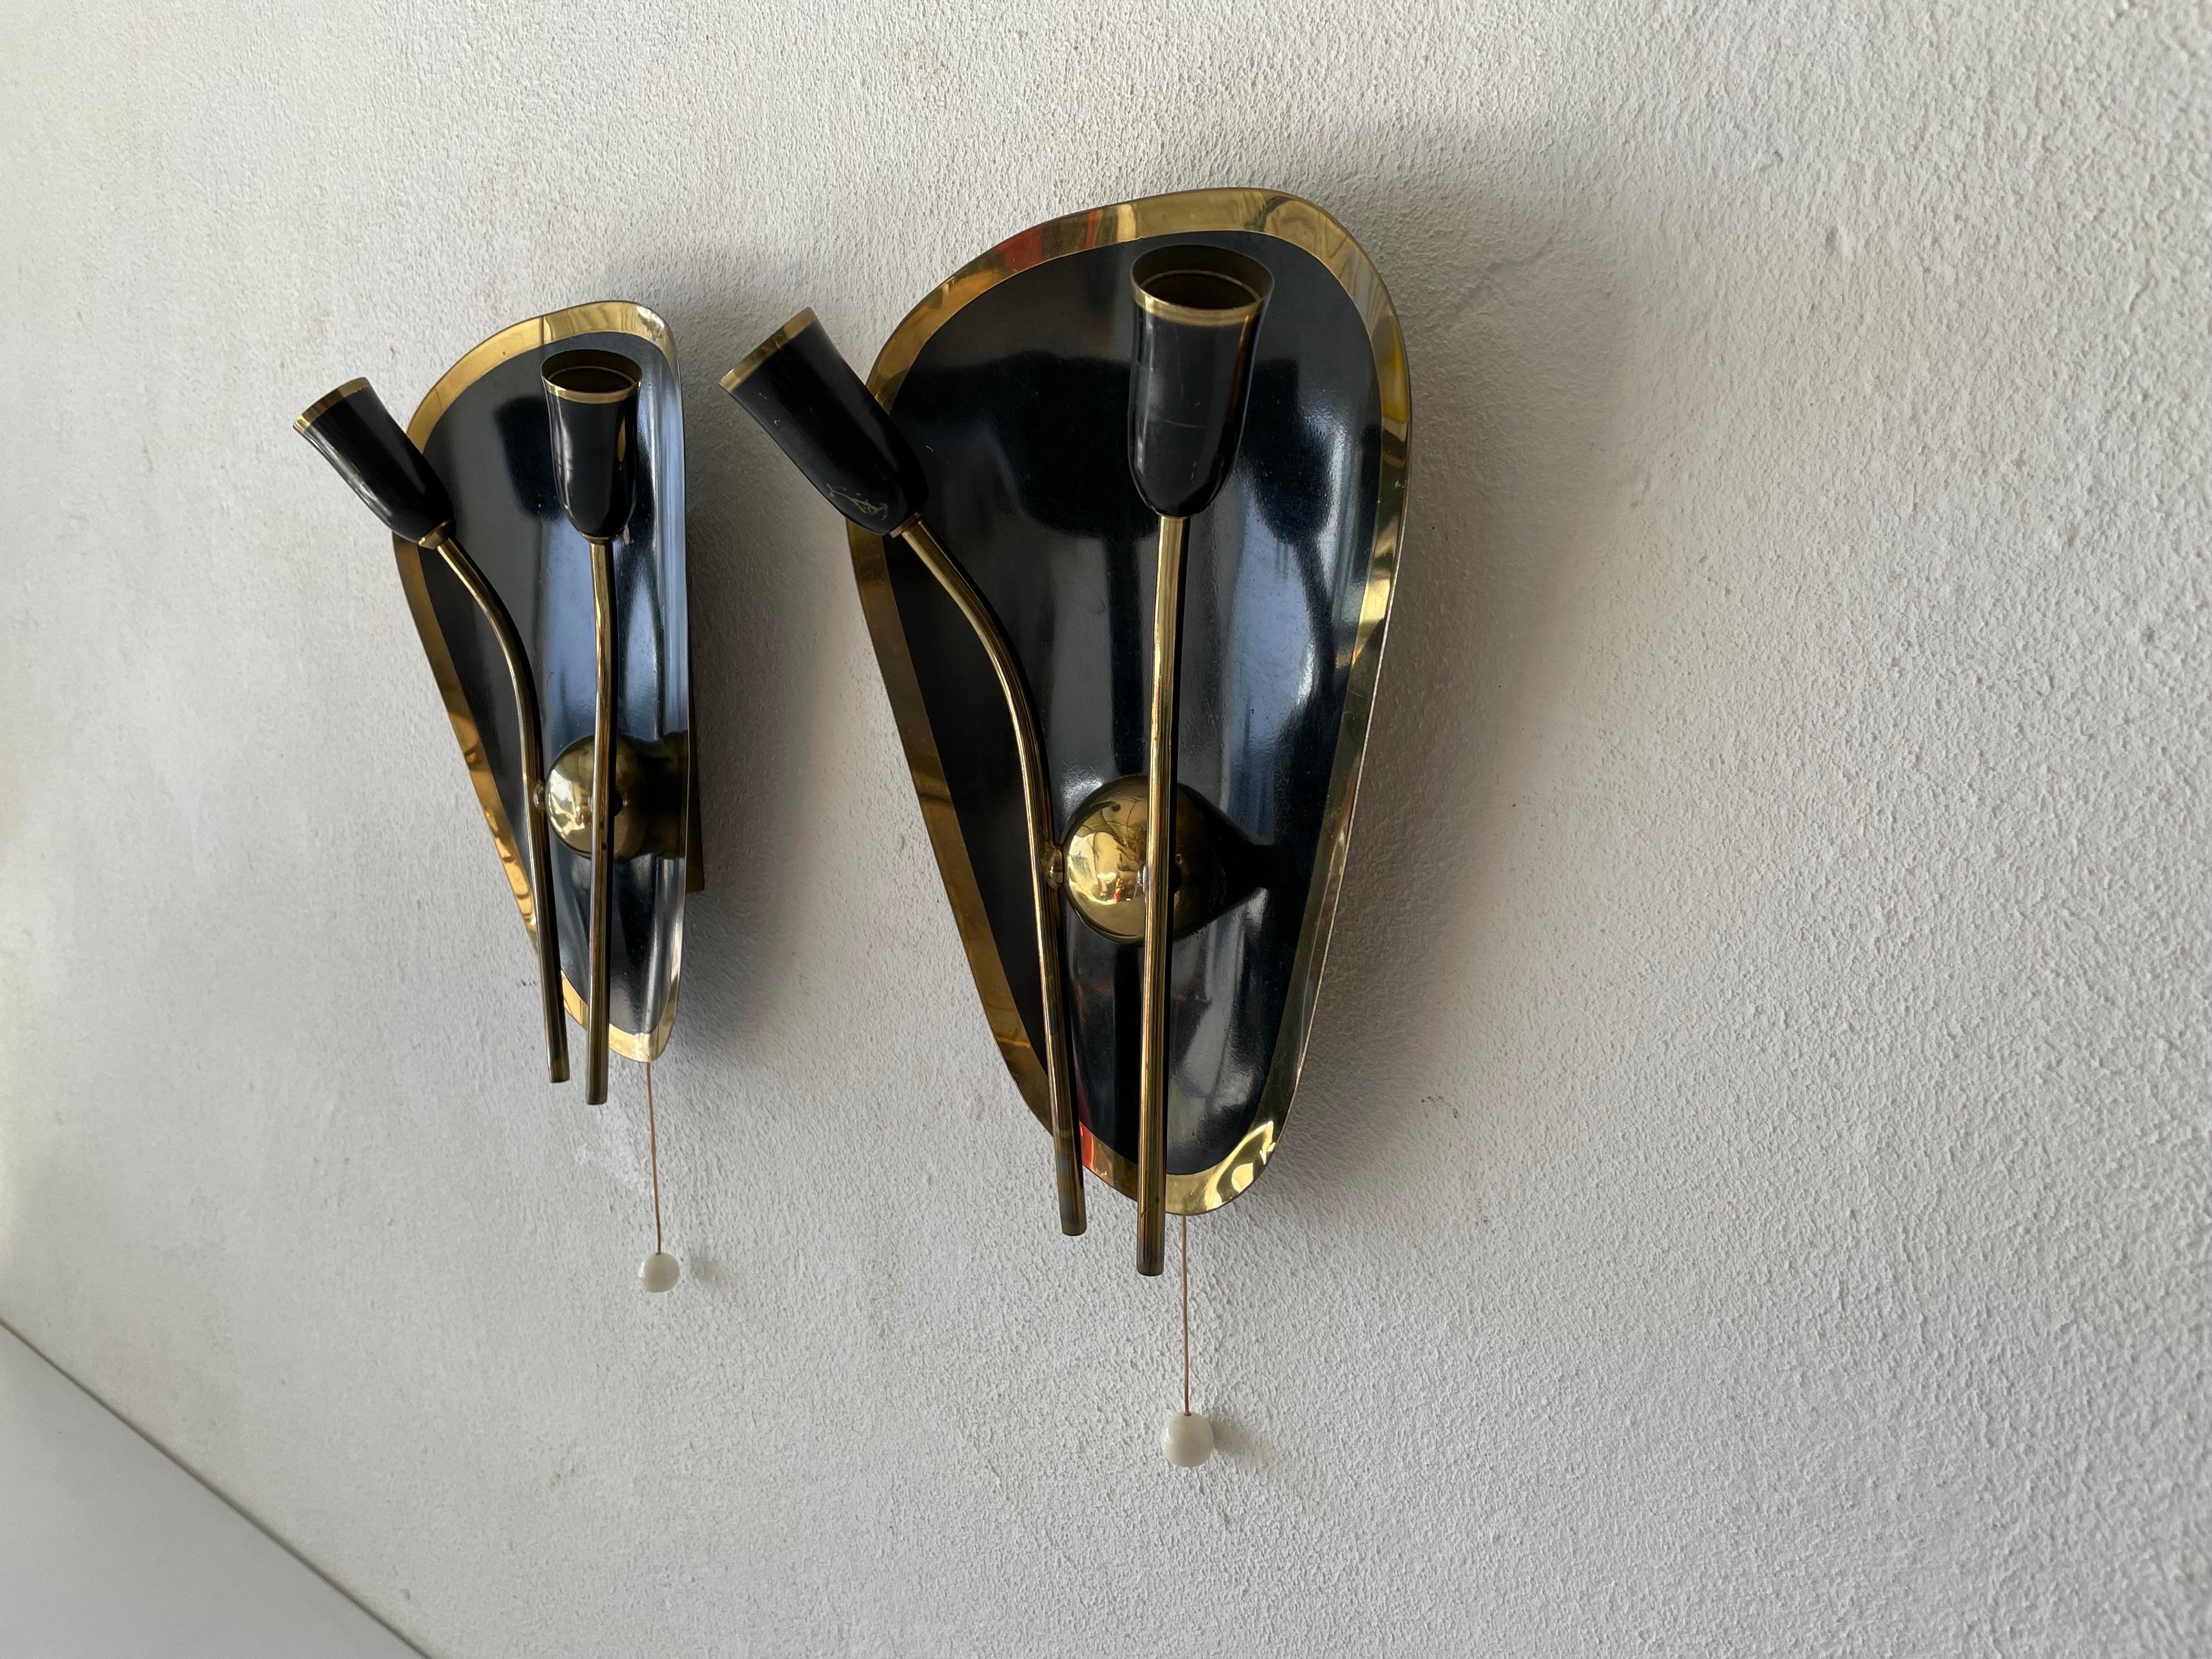 Exclusive Atomic Design Brass - black metal pair of sconces, 1950s, Germany

Very elegant and Minimalist wall lamps
Lamp is in very good condition.

These lamps works with E14 standard light bulbs. 
Wired and suitable to use in all countries.